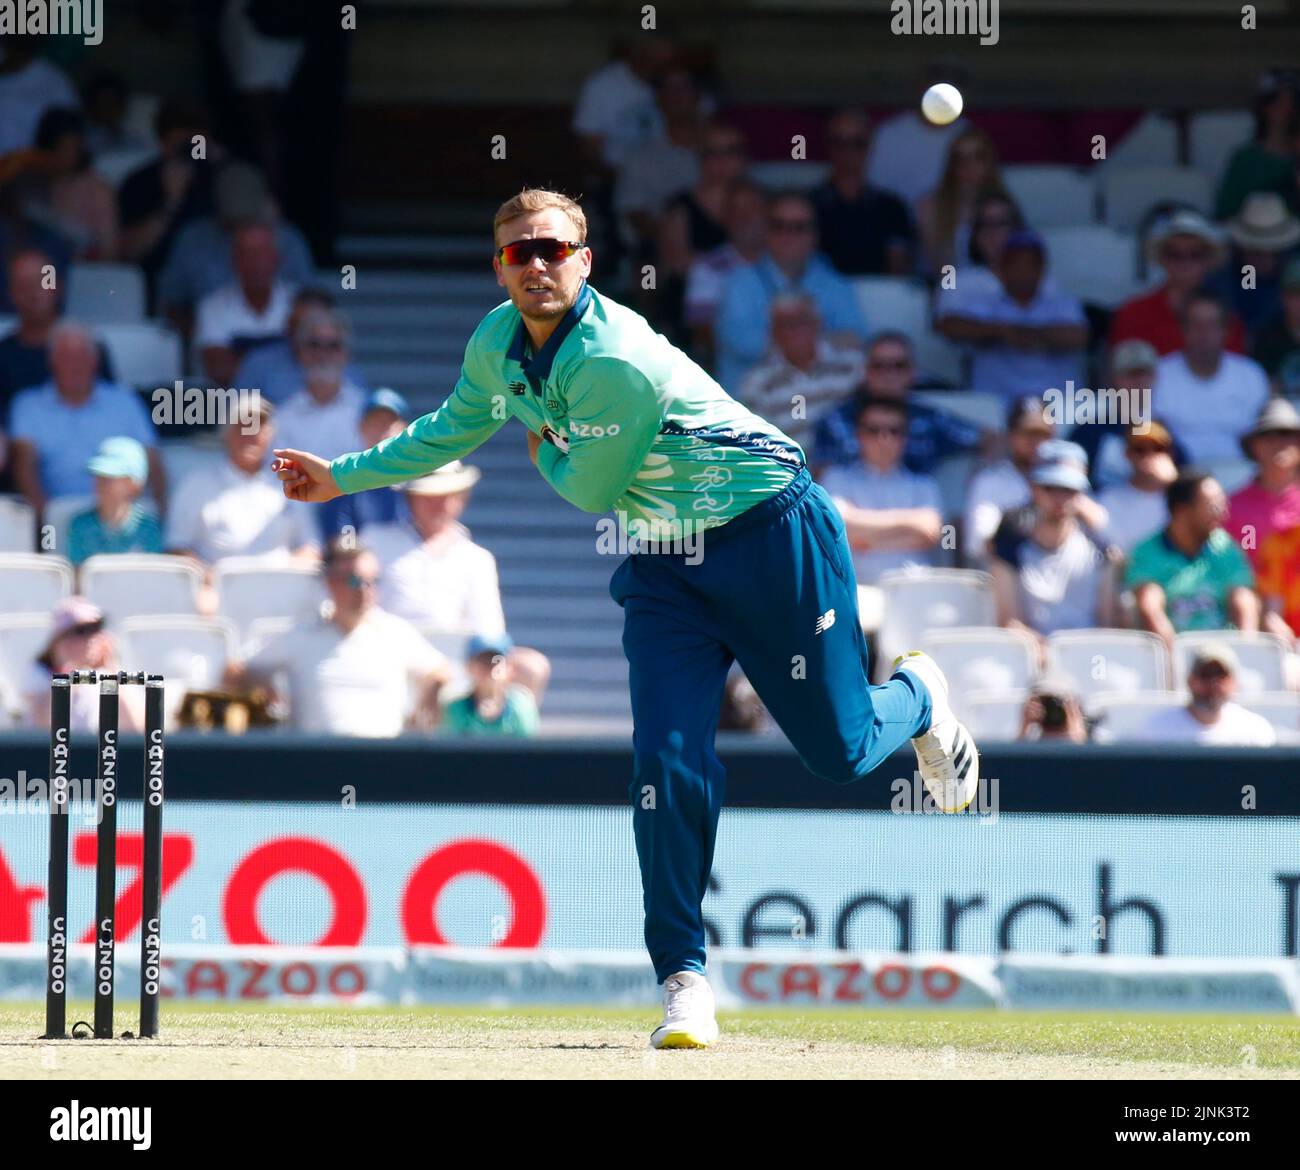 LONDON ENGLAND - AUGUST  11 : Danny Briggs of Oval Invincibles during The Hundred Men match between Oval Invincible's against Northern Supercharges at Stock Photo